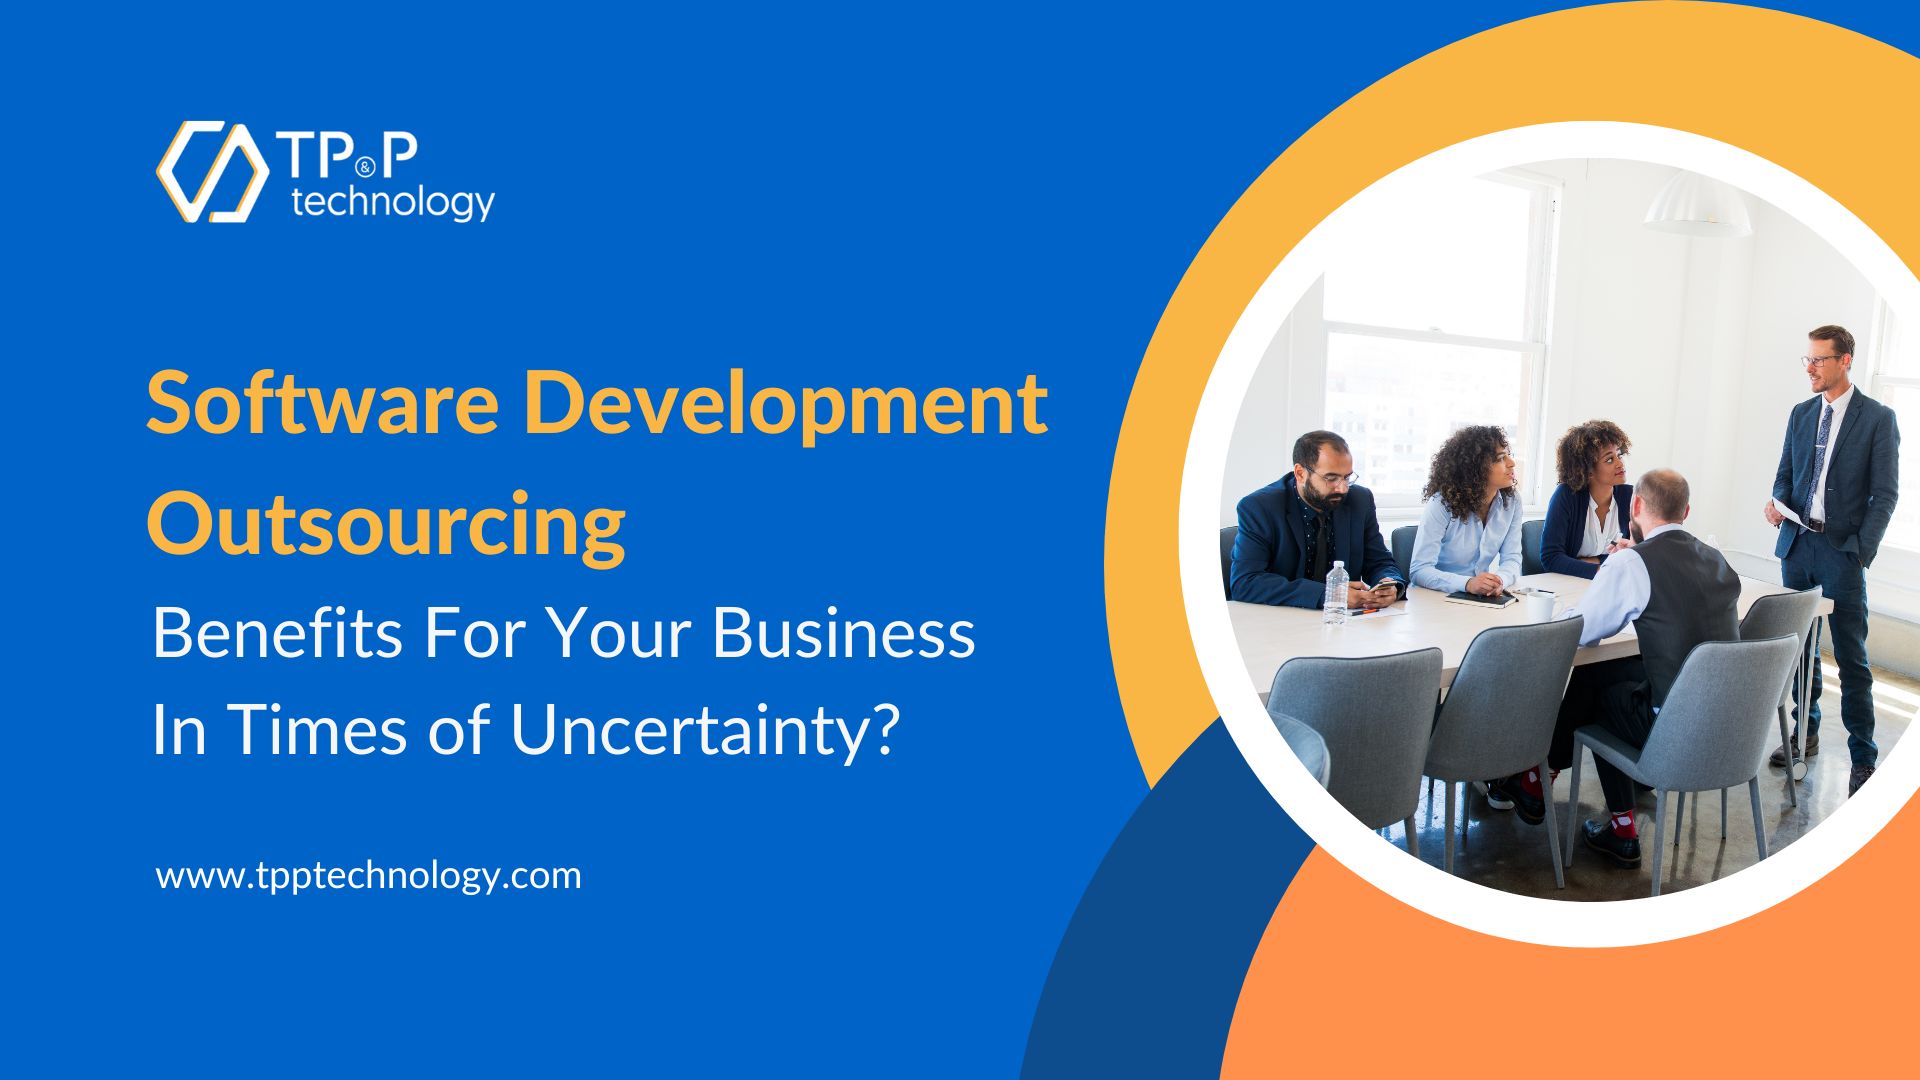 Software Development Outsourcing: Benefits For Your Business In Times of Uncertainty? 